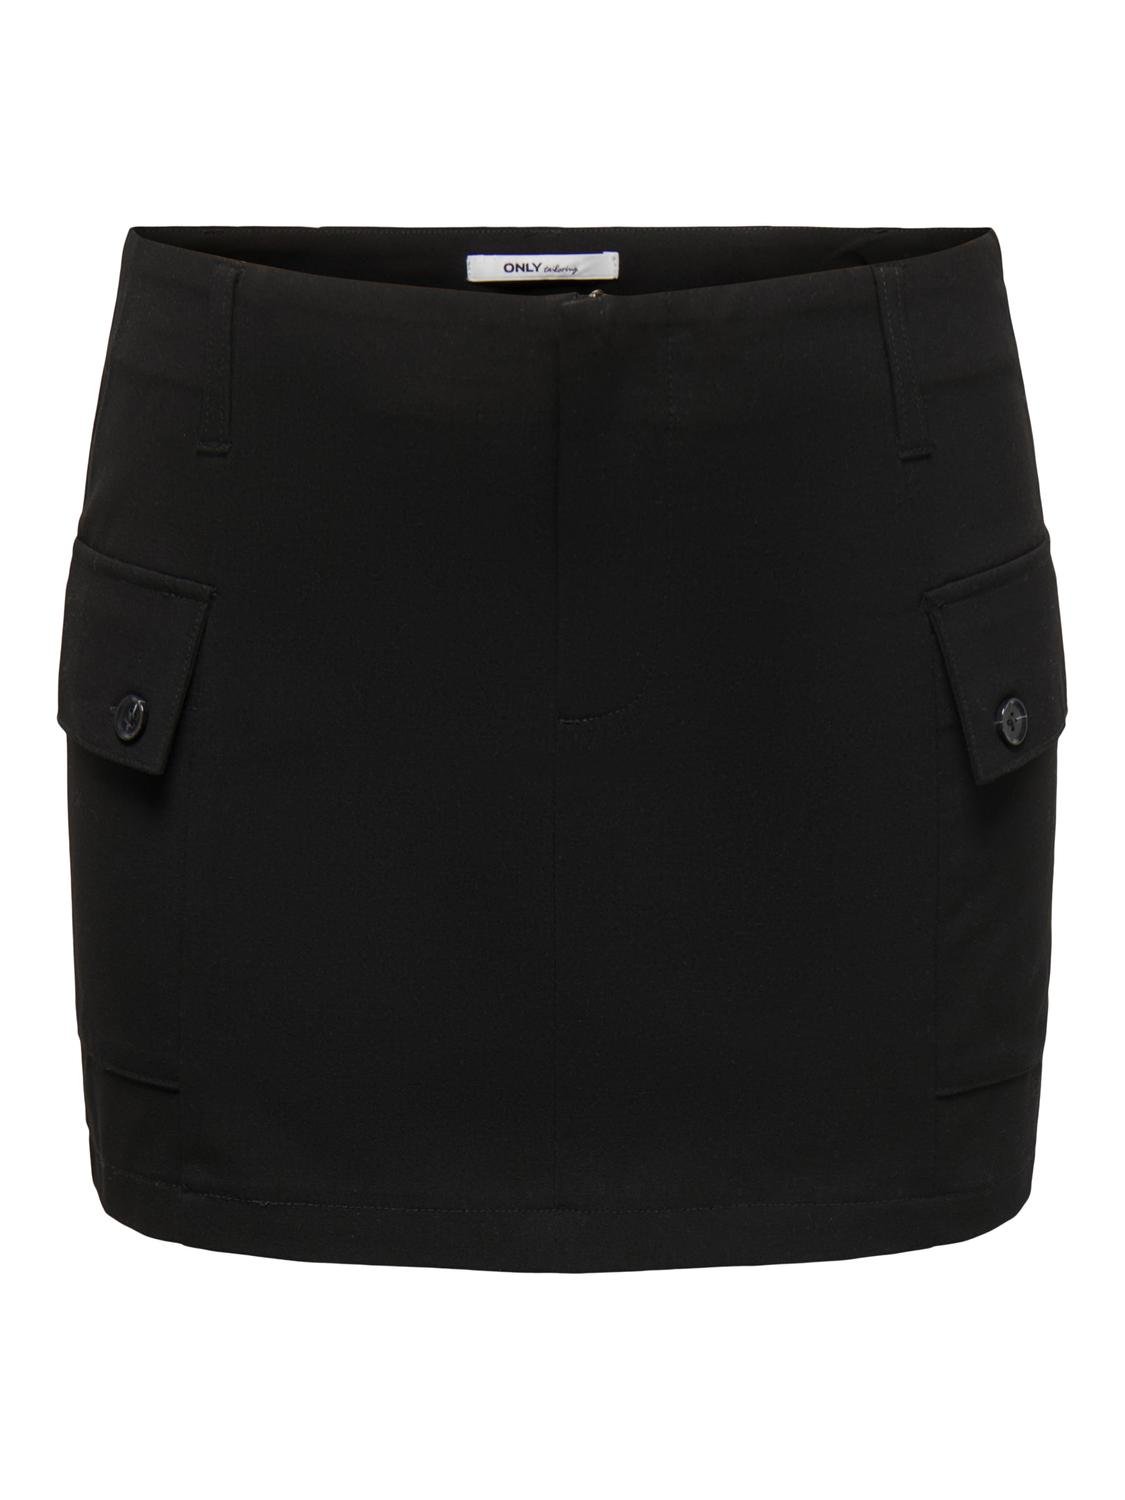 ONLY Mini skirt with cargo pockets -Black - 15298713